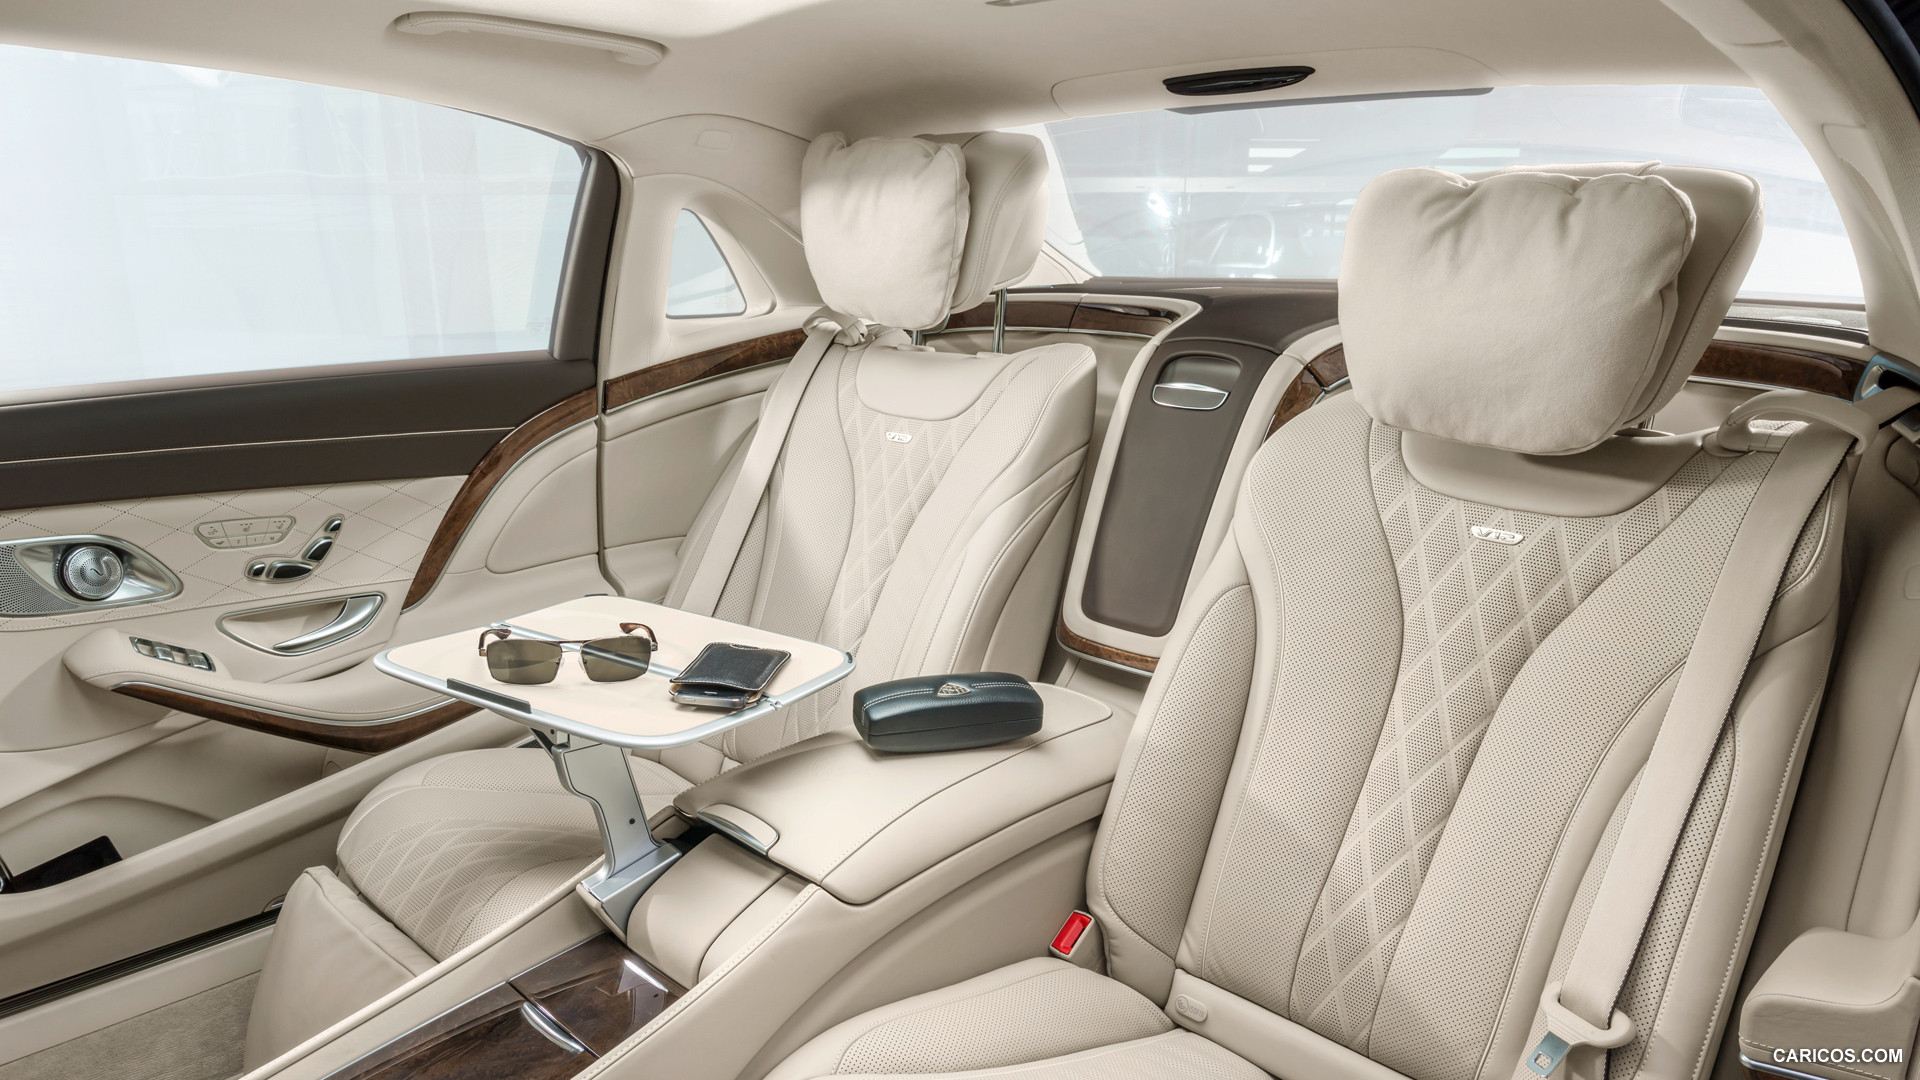 2016 Mercedes-Maybach S-Class S600 - Interior Rear Seats, #38 of 225